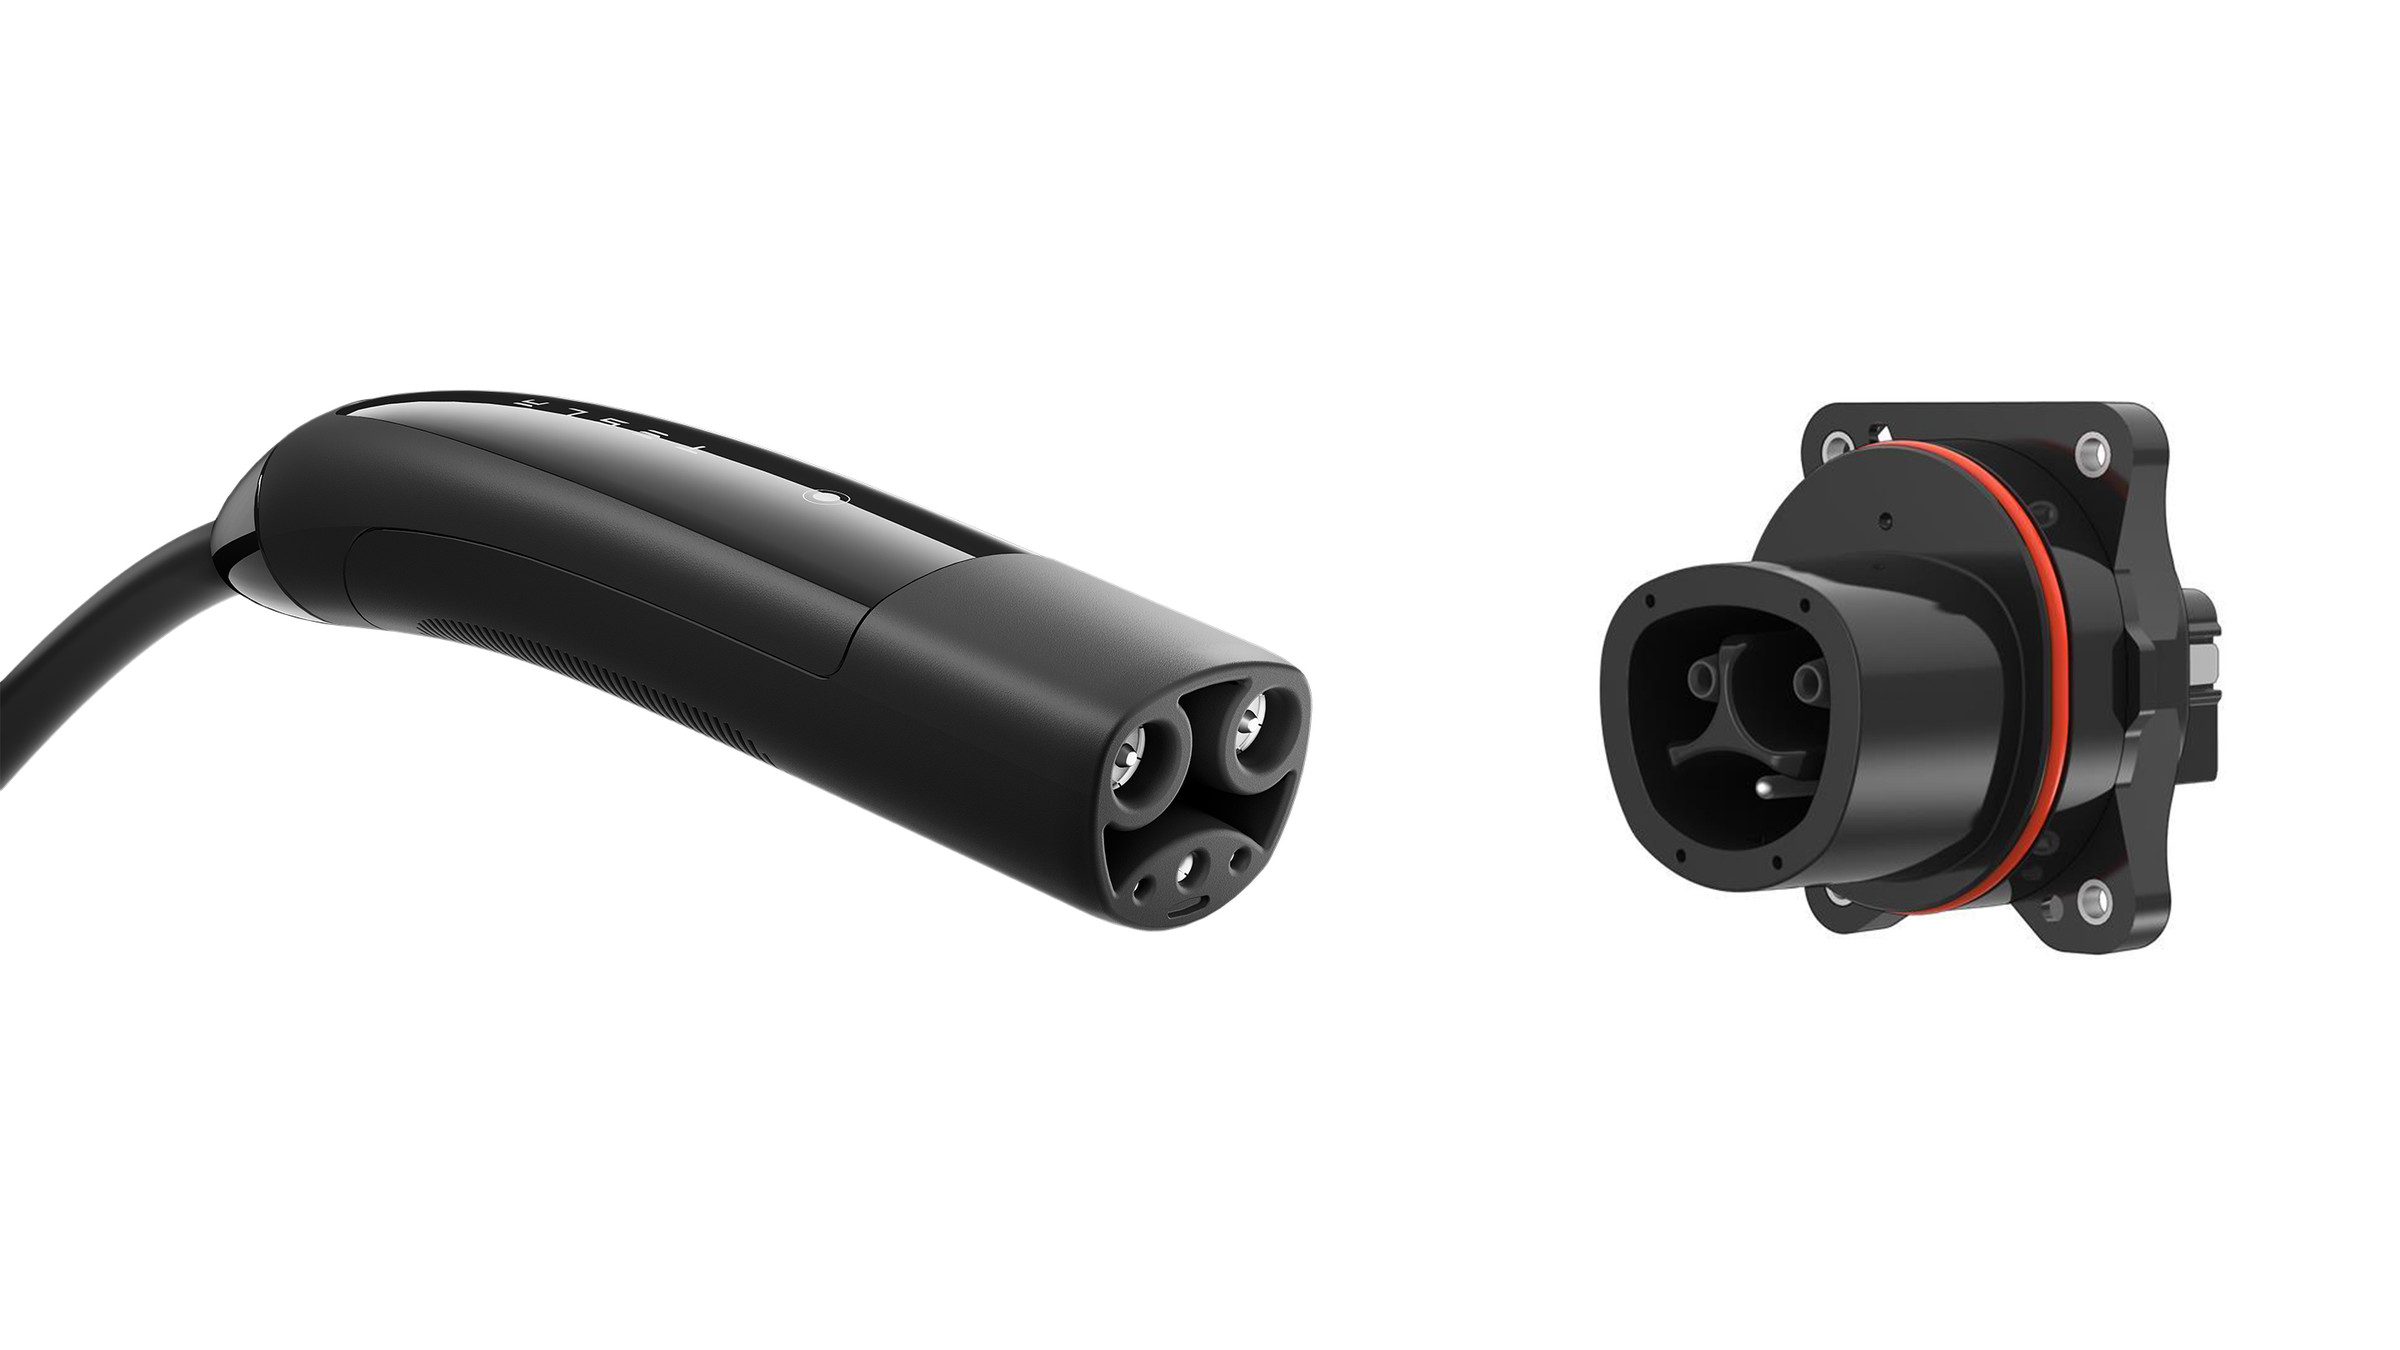 Tesla is releasing the specs on its connector in the hope manufacturers can add the port to its cars.